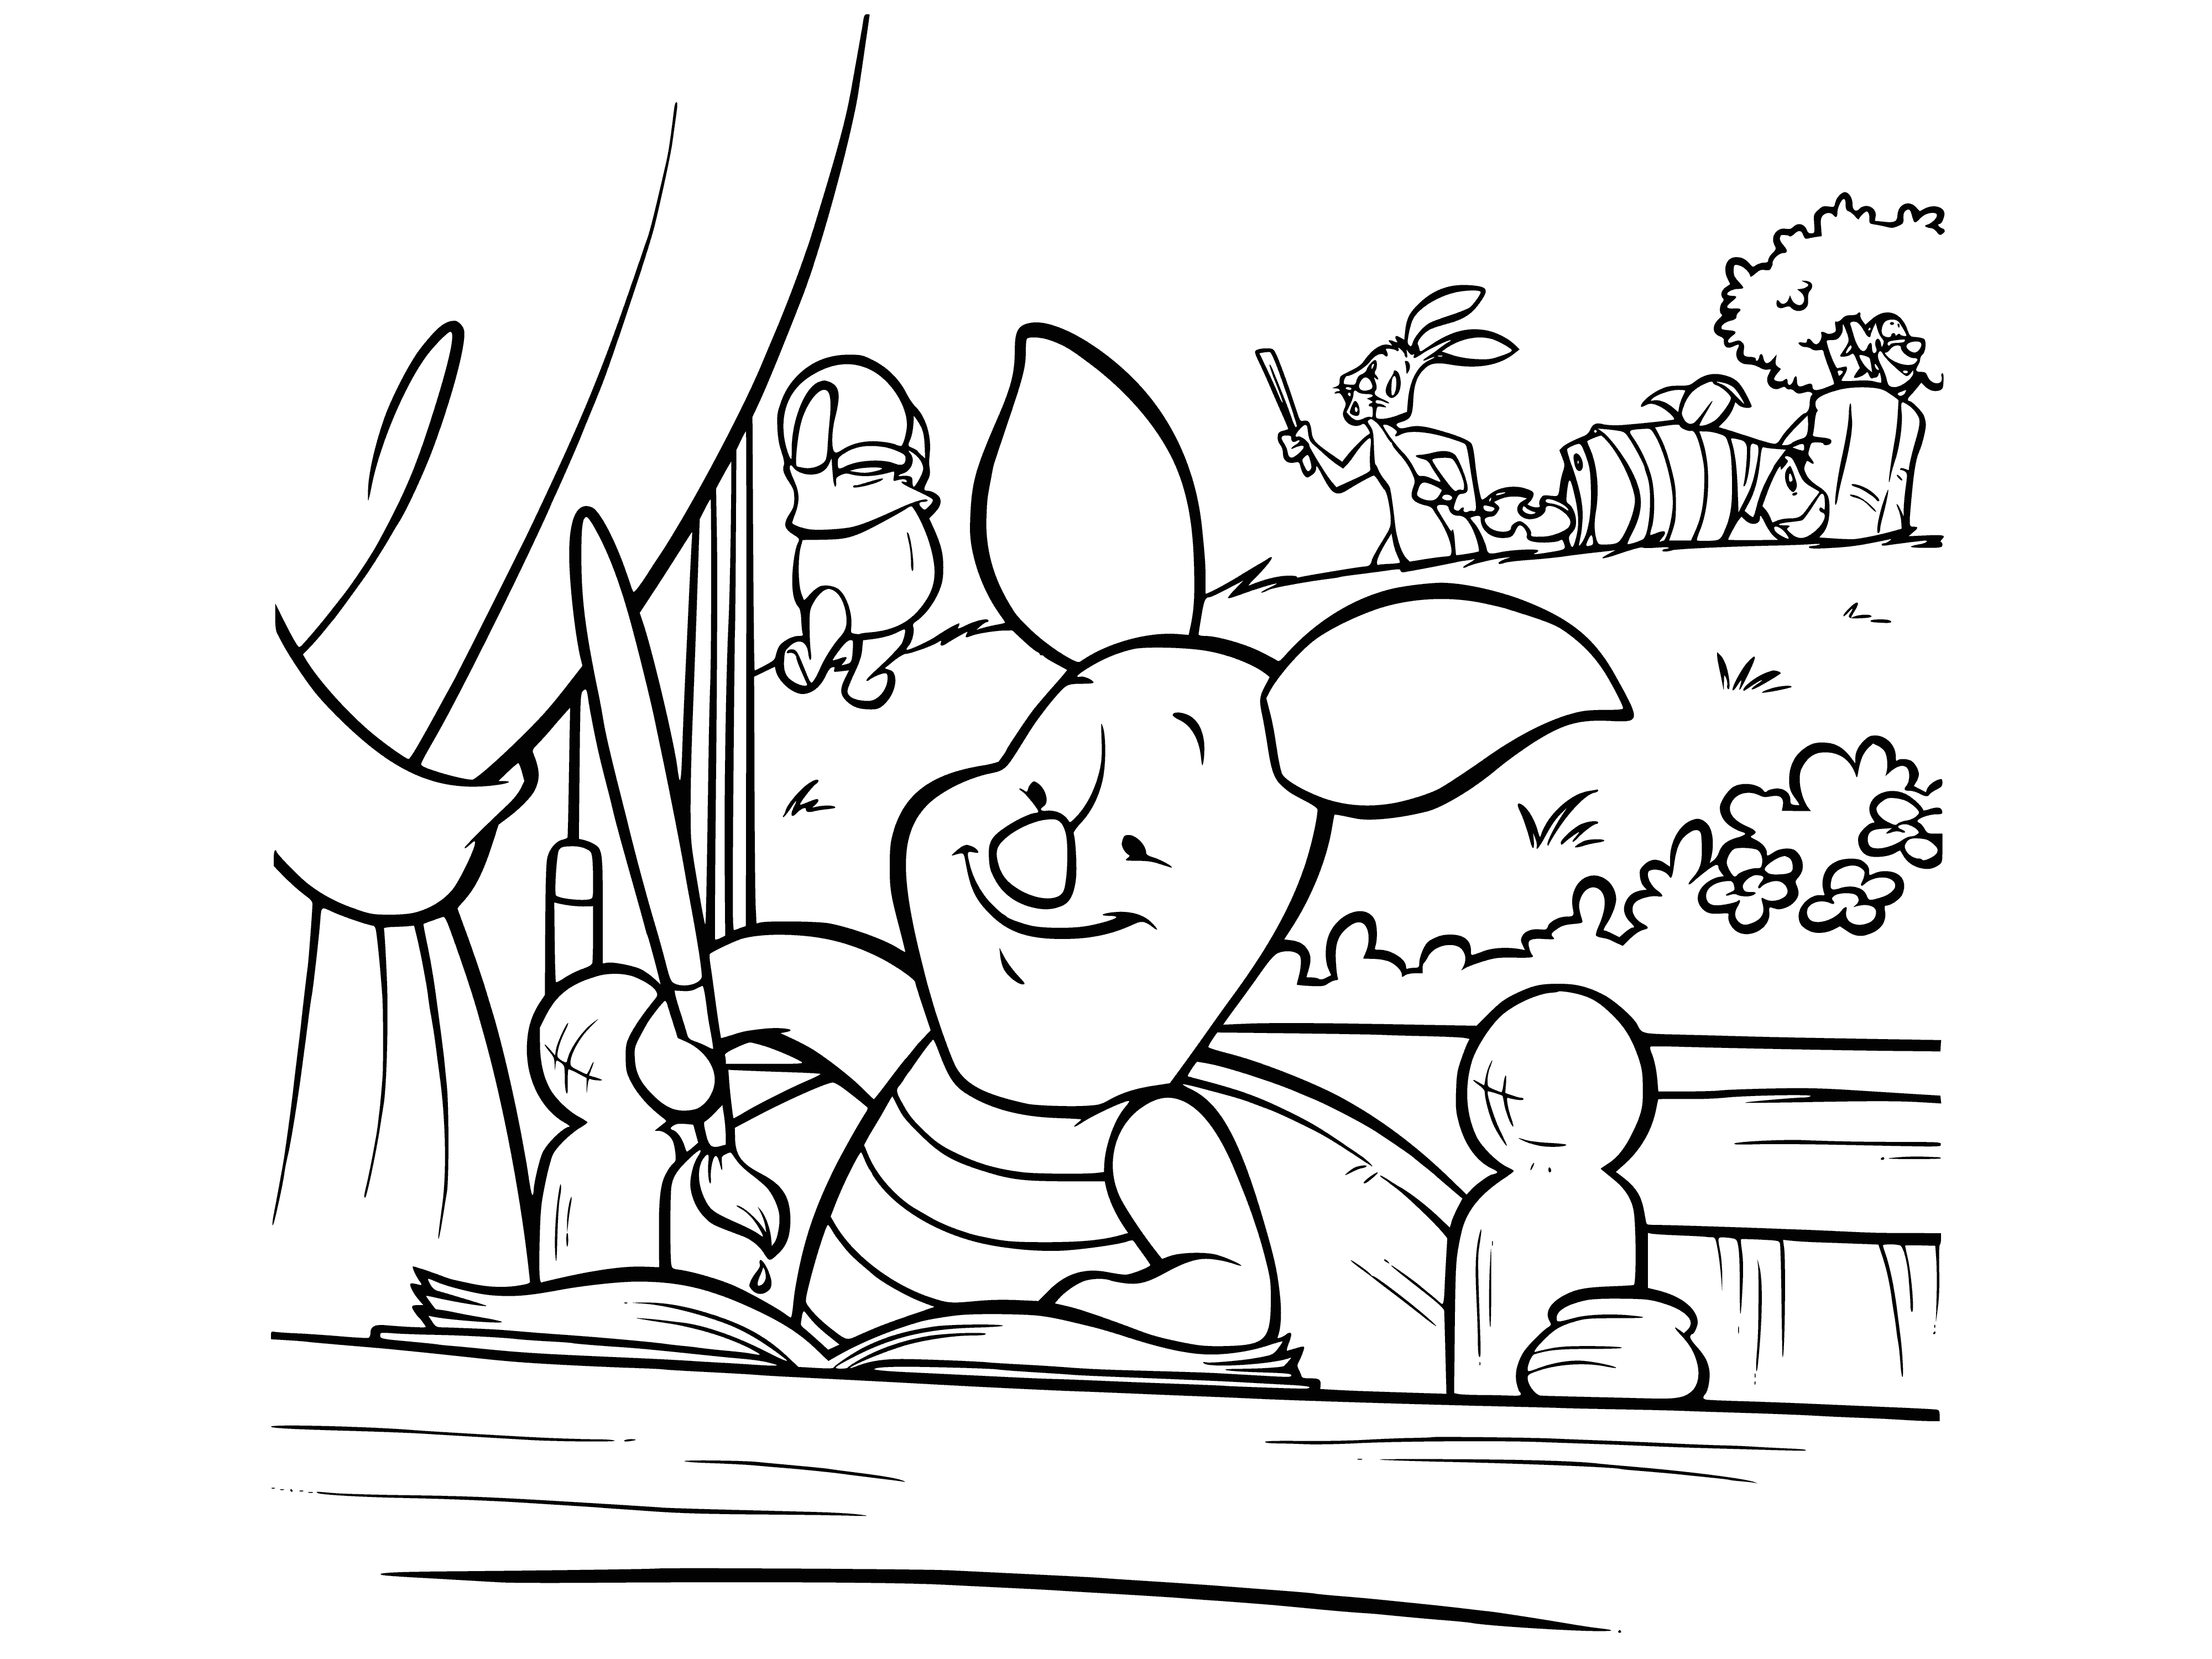 coloring page: Pig on a stool draws, wearing a shirt, bow tie w/ a missing left ear.